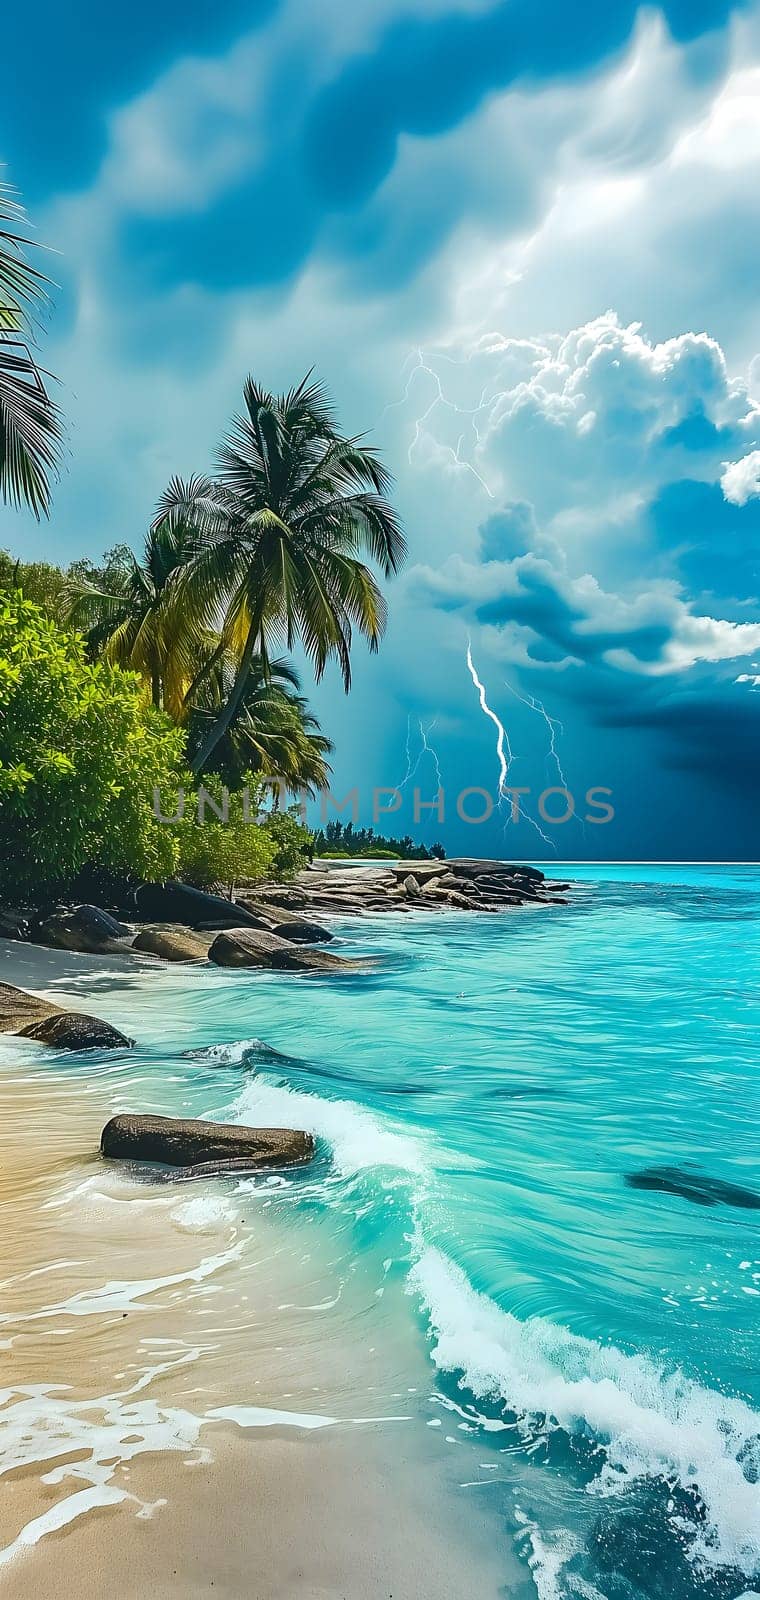 tropical beach view at cloudy stormy day with white sand, turquoise water and palm trees, neural network generated image by z1b